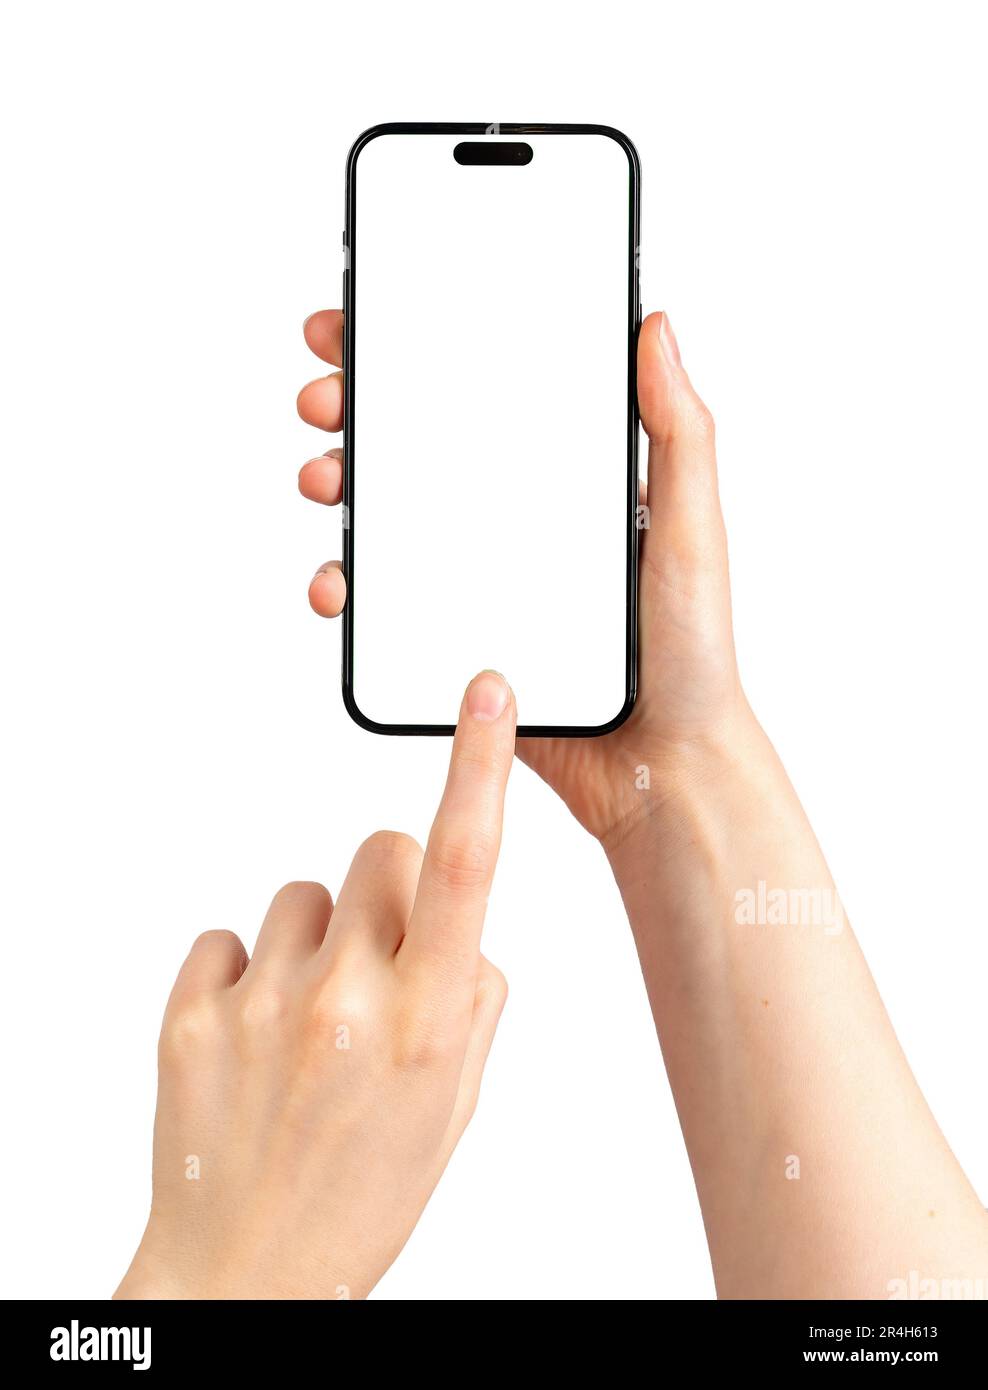 Lodz, Poland May 26 2023 Iphone 14 pro max screen mock-up in hand, finger tapping, clicking on touchscreen mockup, isolated on white background. Stock Photo